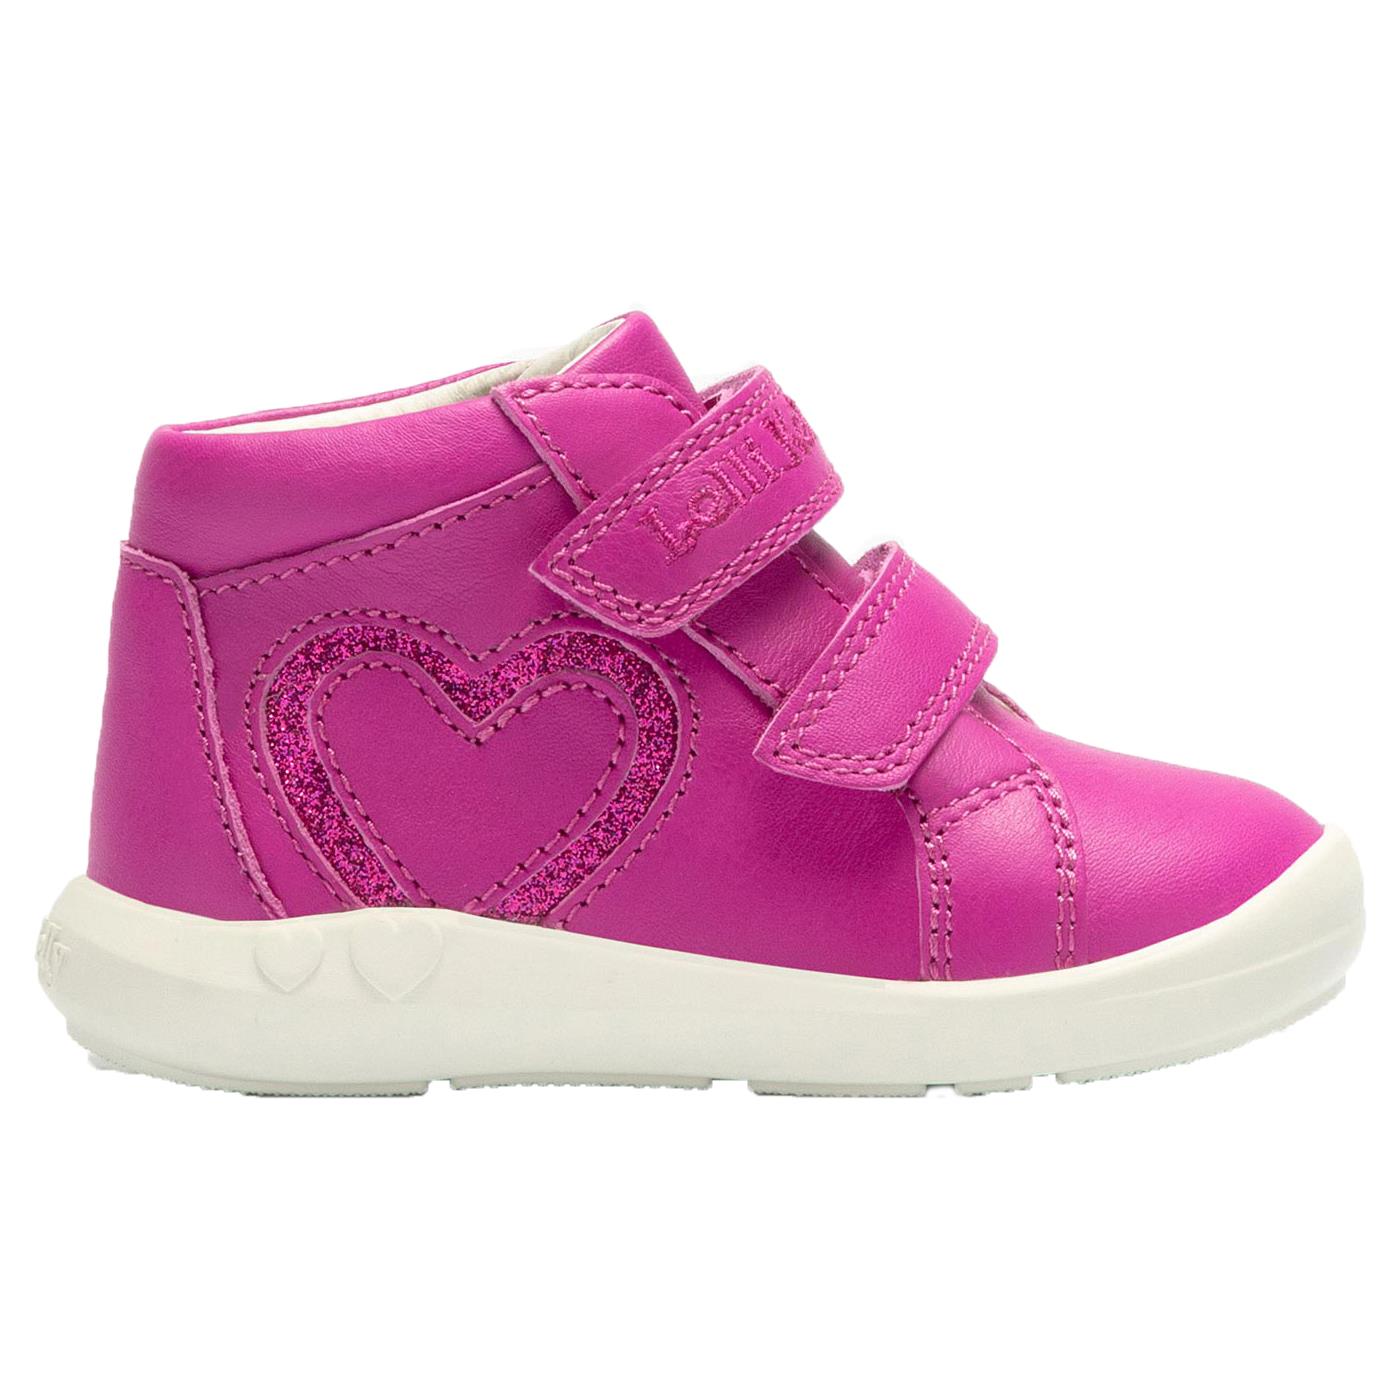 Lelli Kelly LK3311 (CN01) Estelle Fuxia Pink Soft Leather Ankle Boots